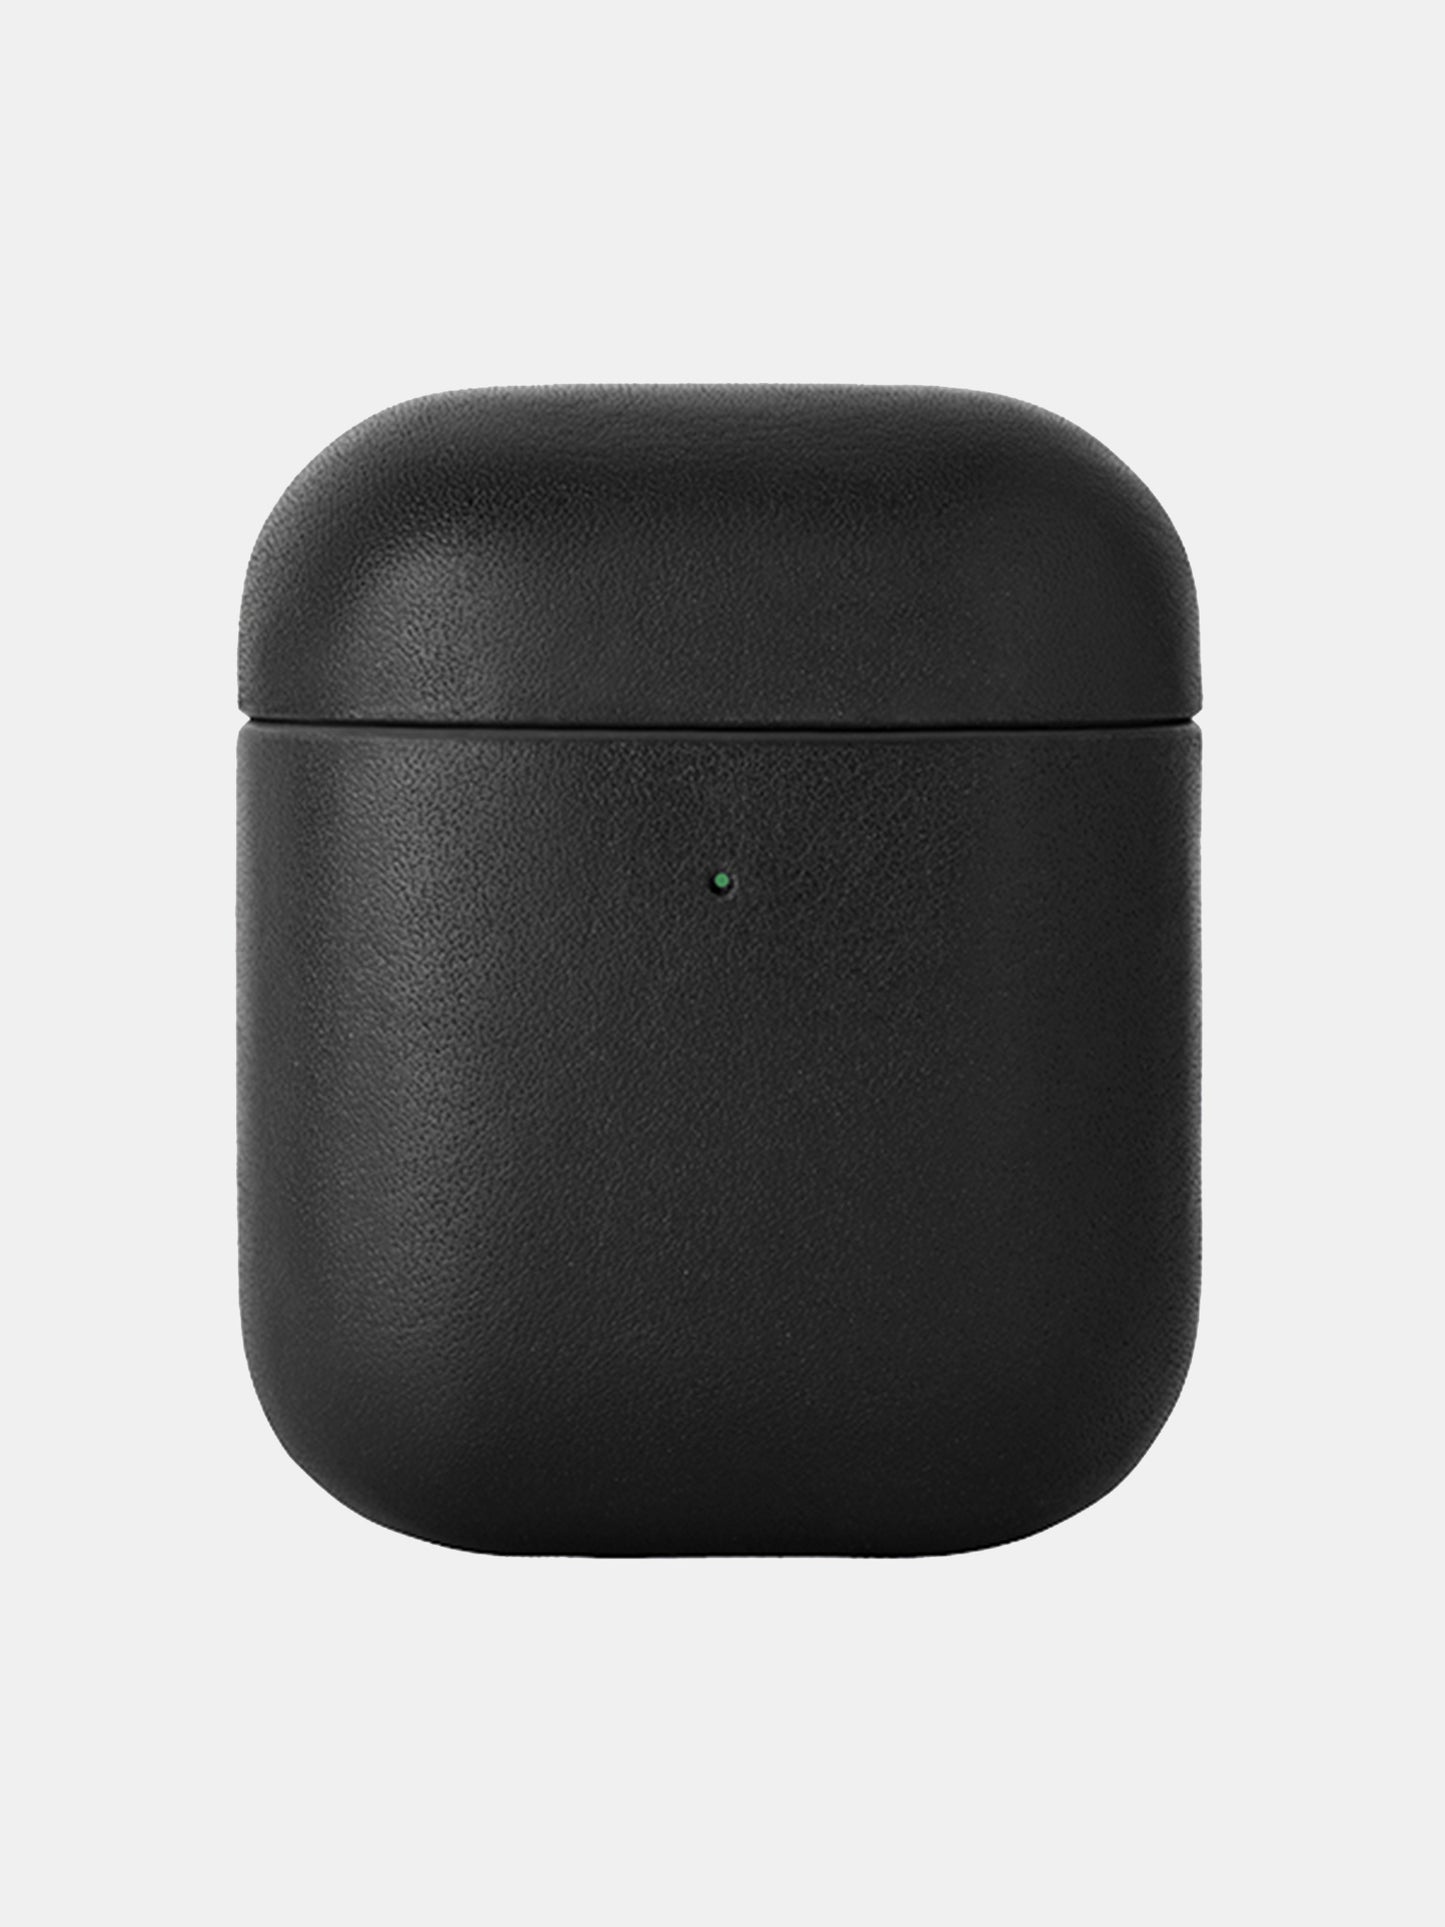 Native Union Black Leather Case for AirPods